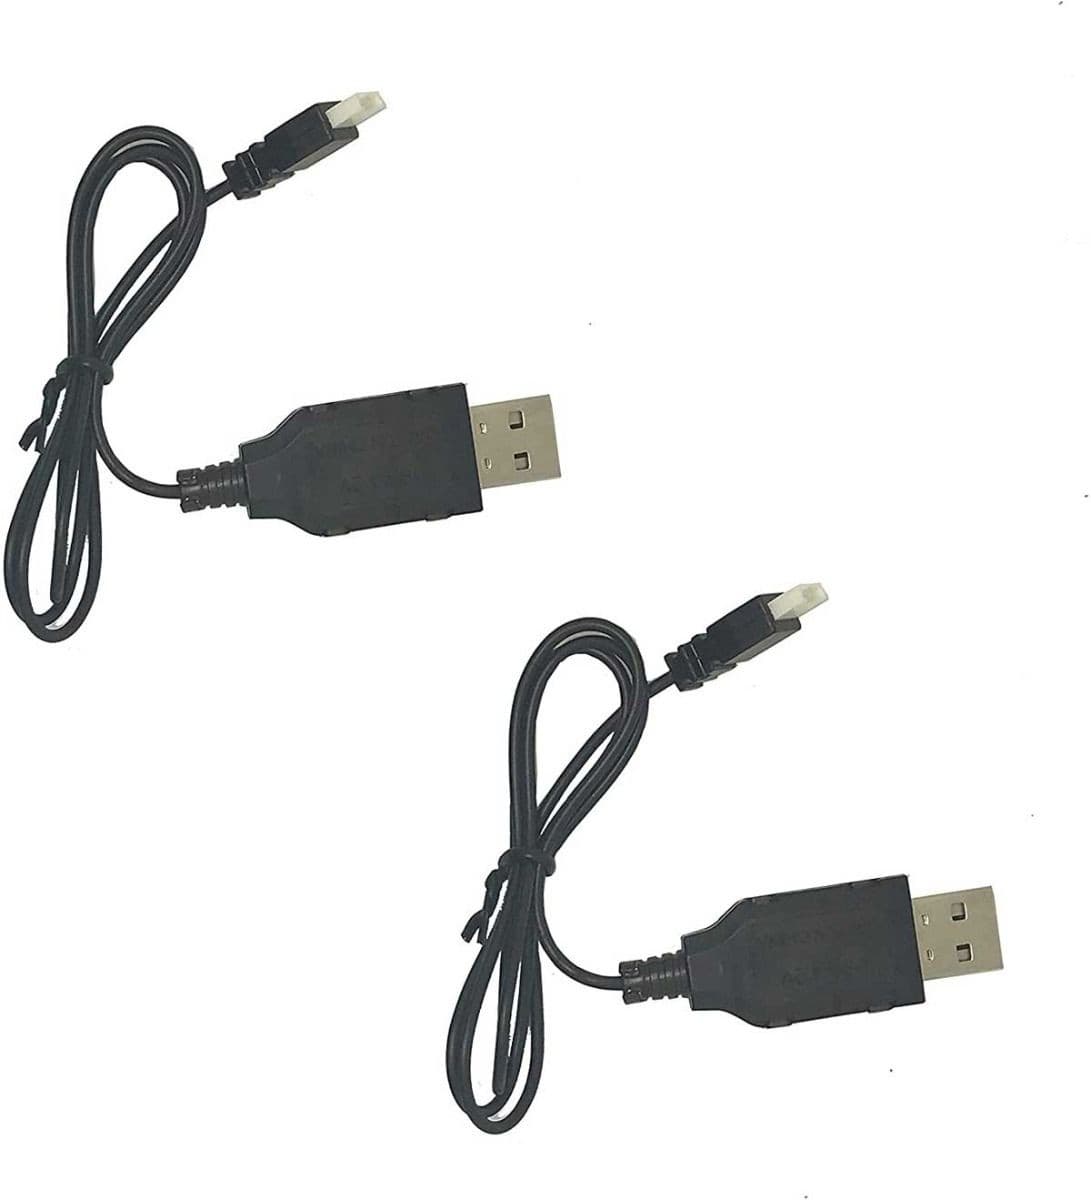 Morgen Nyttig anklageren VOLANTEXRC RC Plane Spare Parts: 1S 3.7V USB charger for RC Airplane